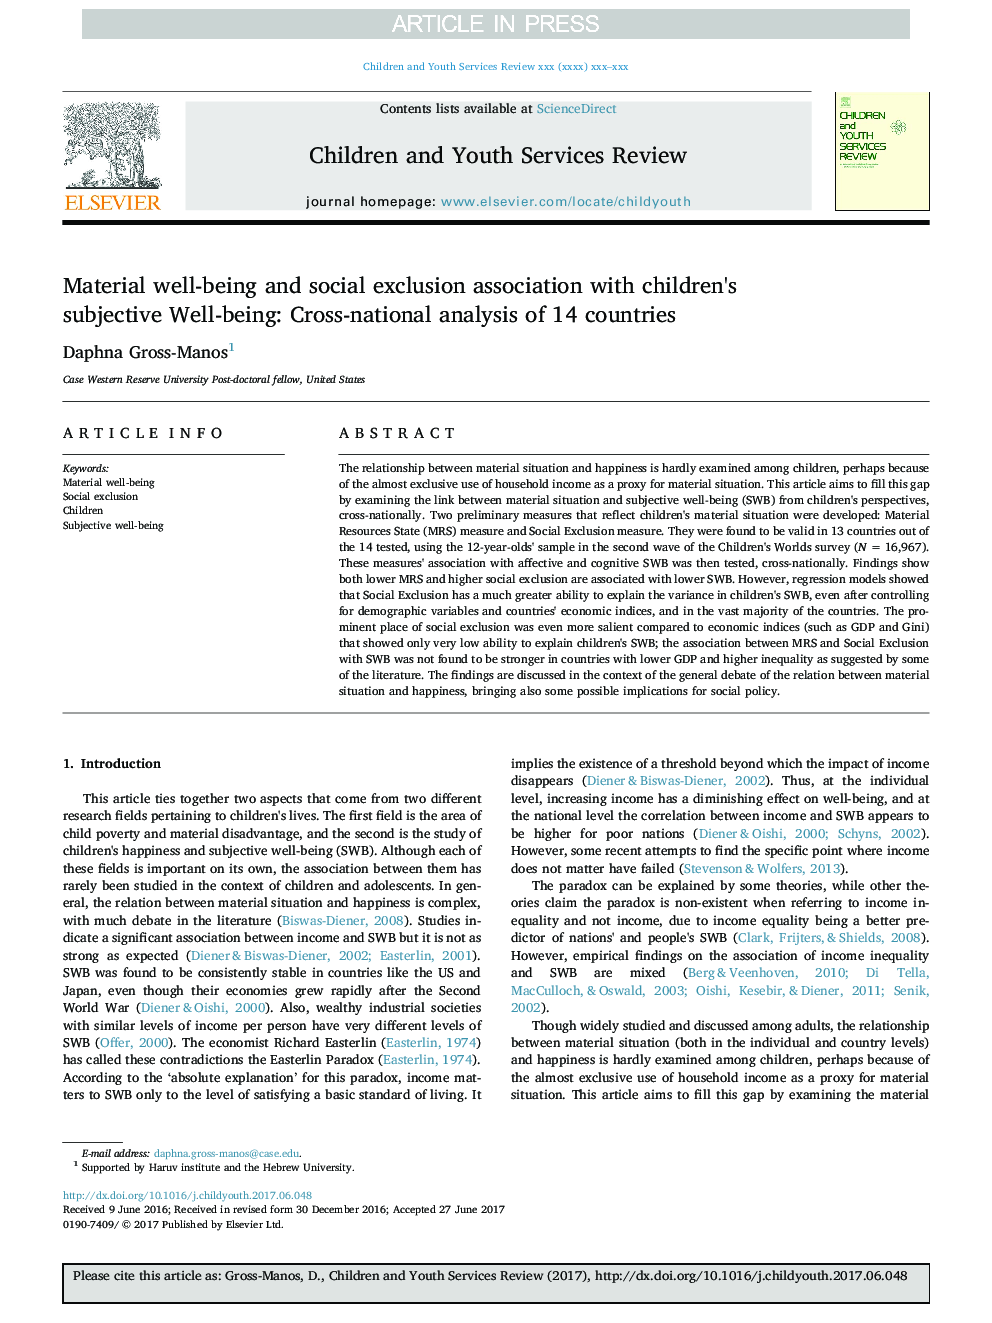 Material well-being and social exclusion association with children's subjective Well-being: Cross-national analysis of 14 countries